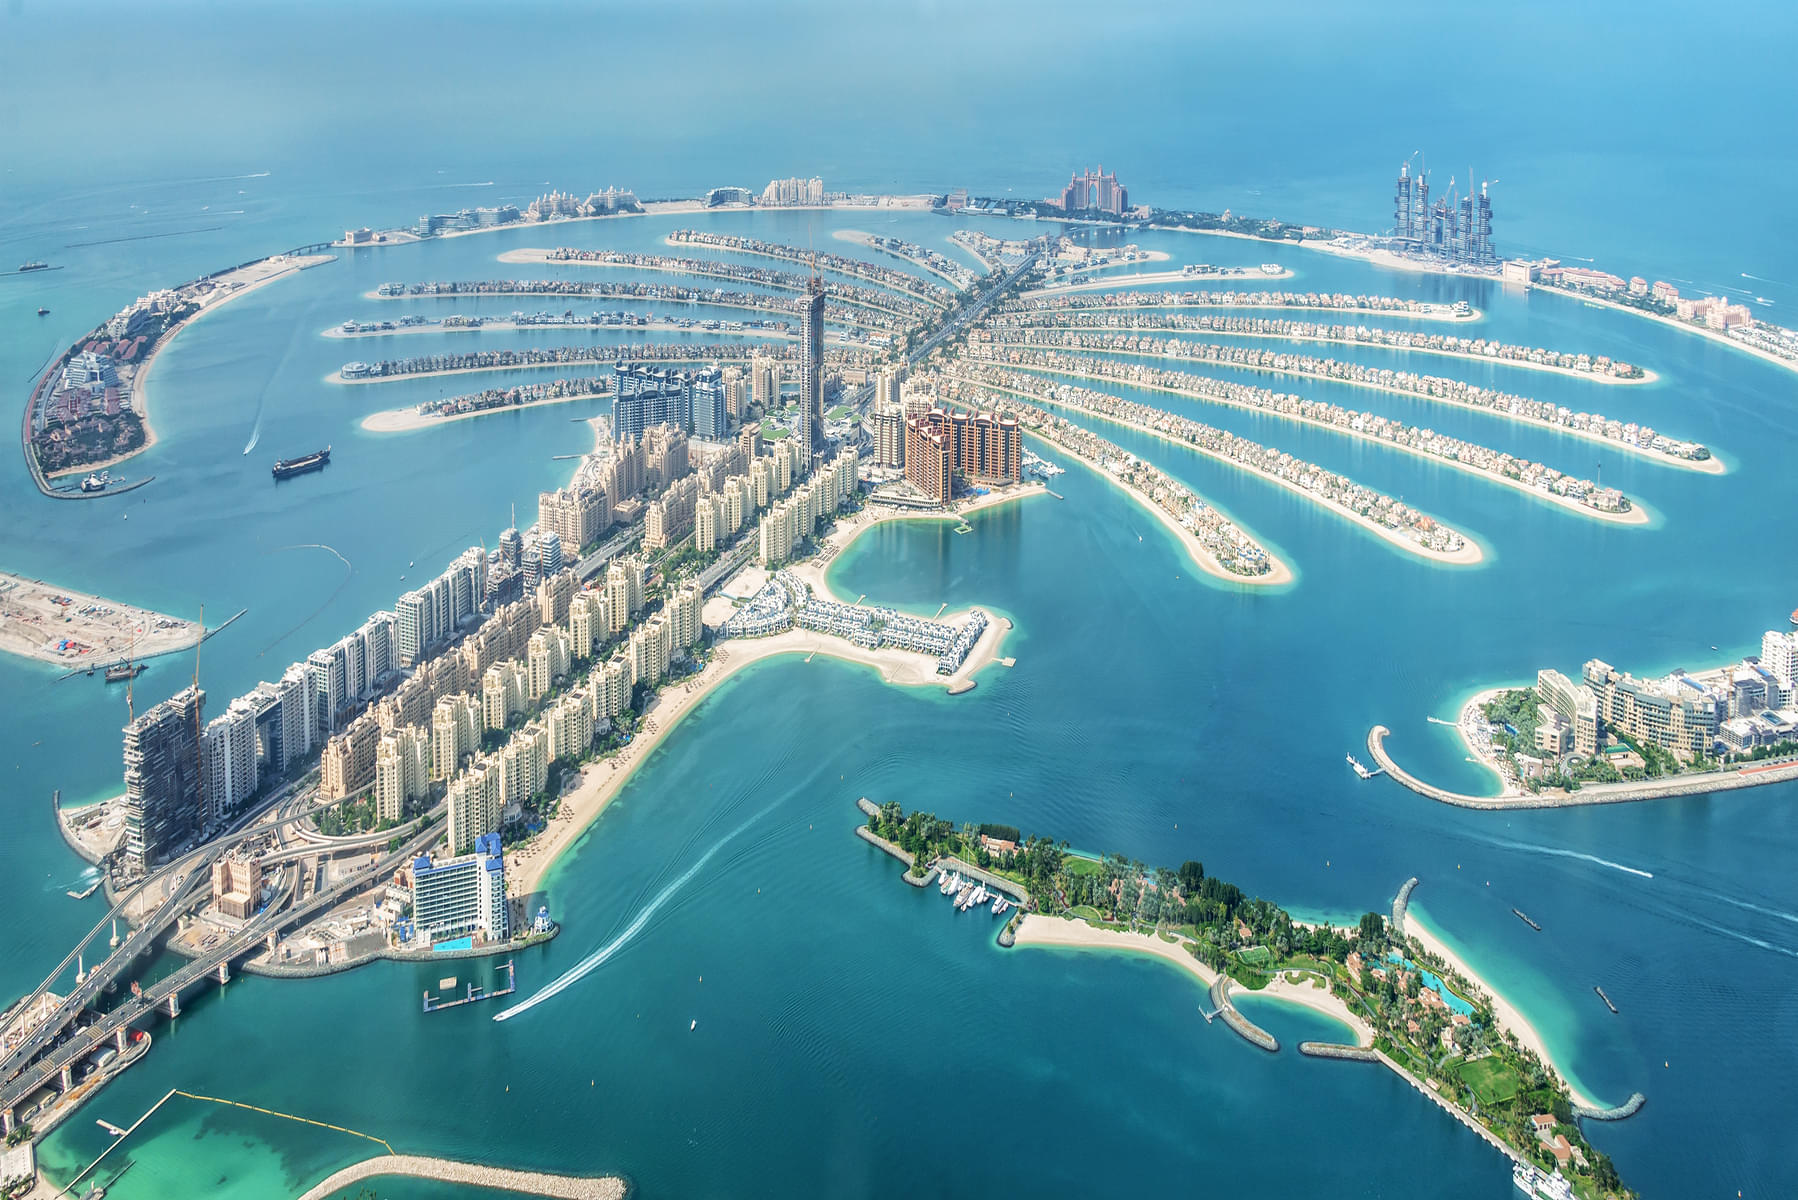 Tips for Visiting Palm Jumeirah